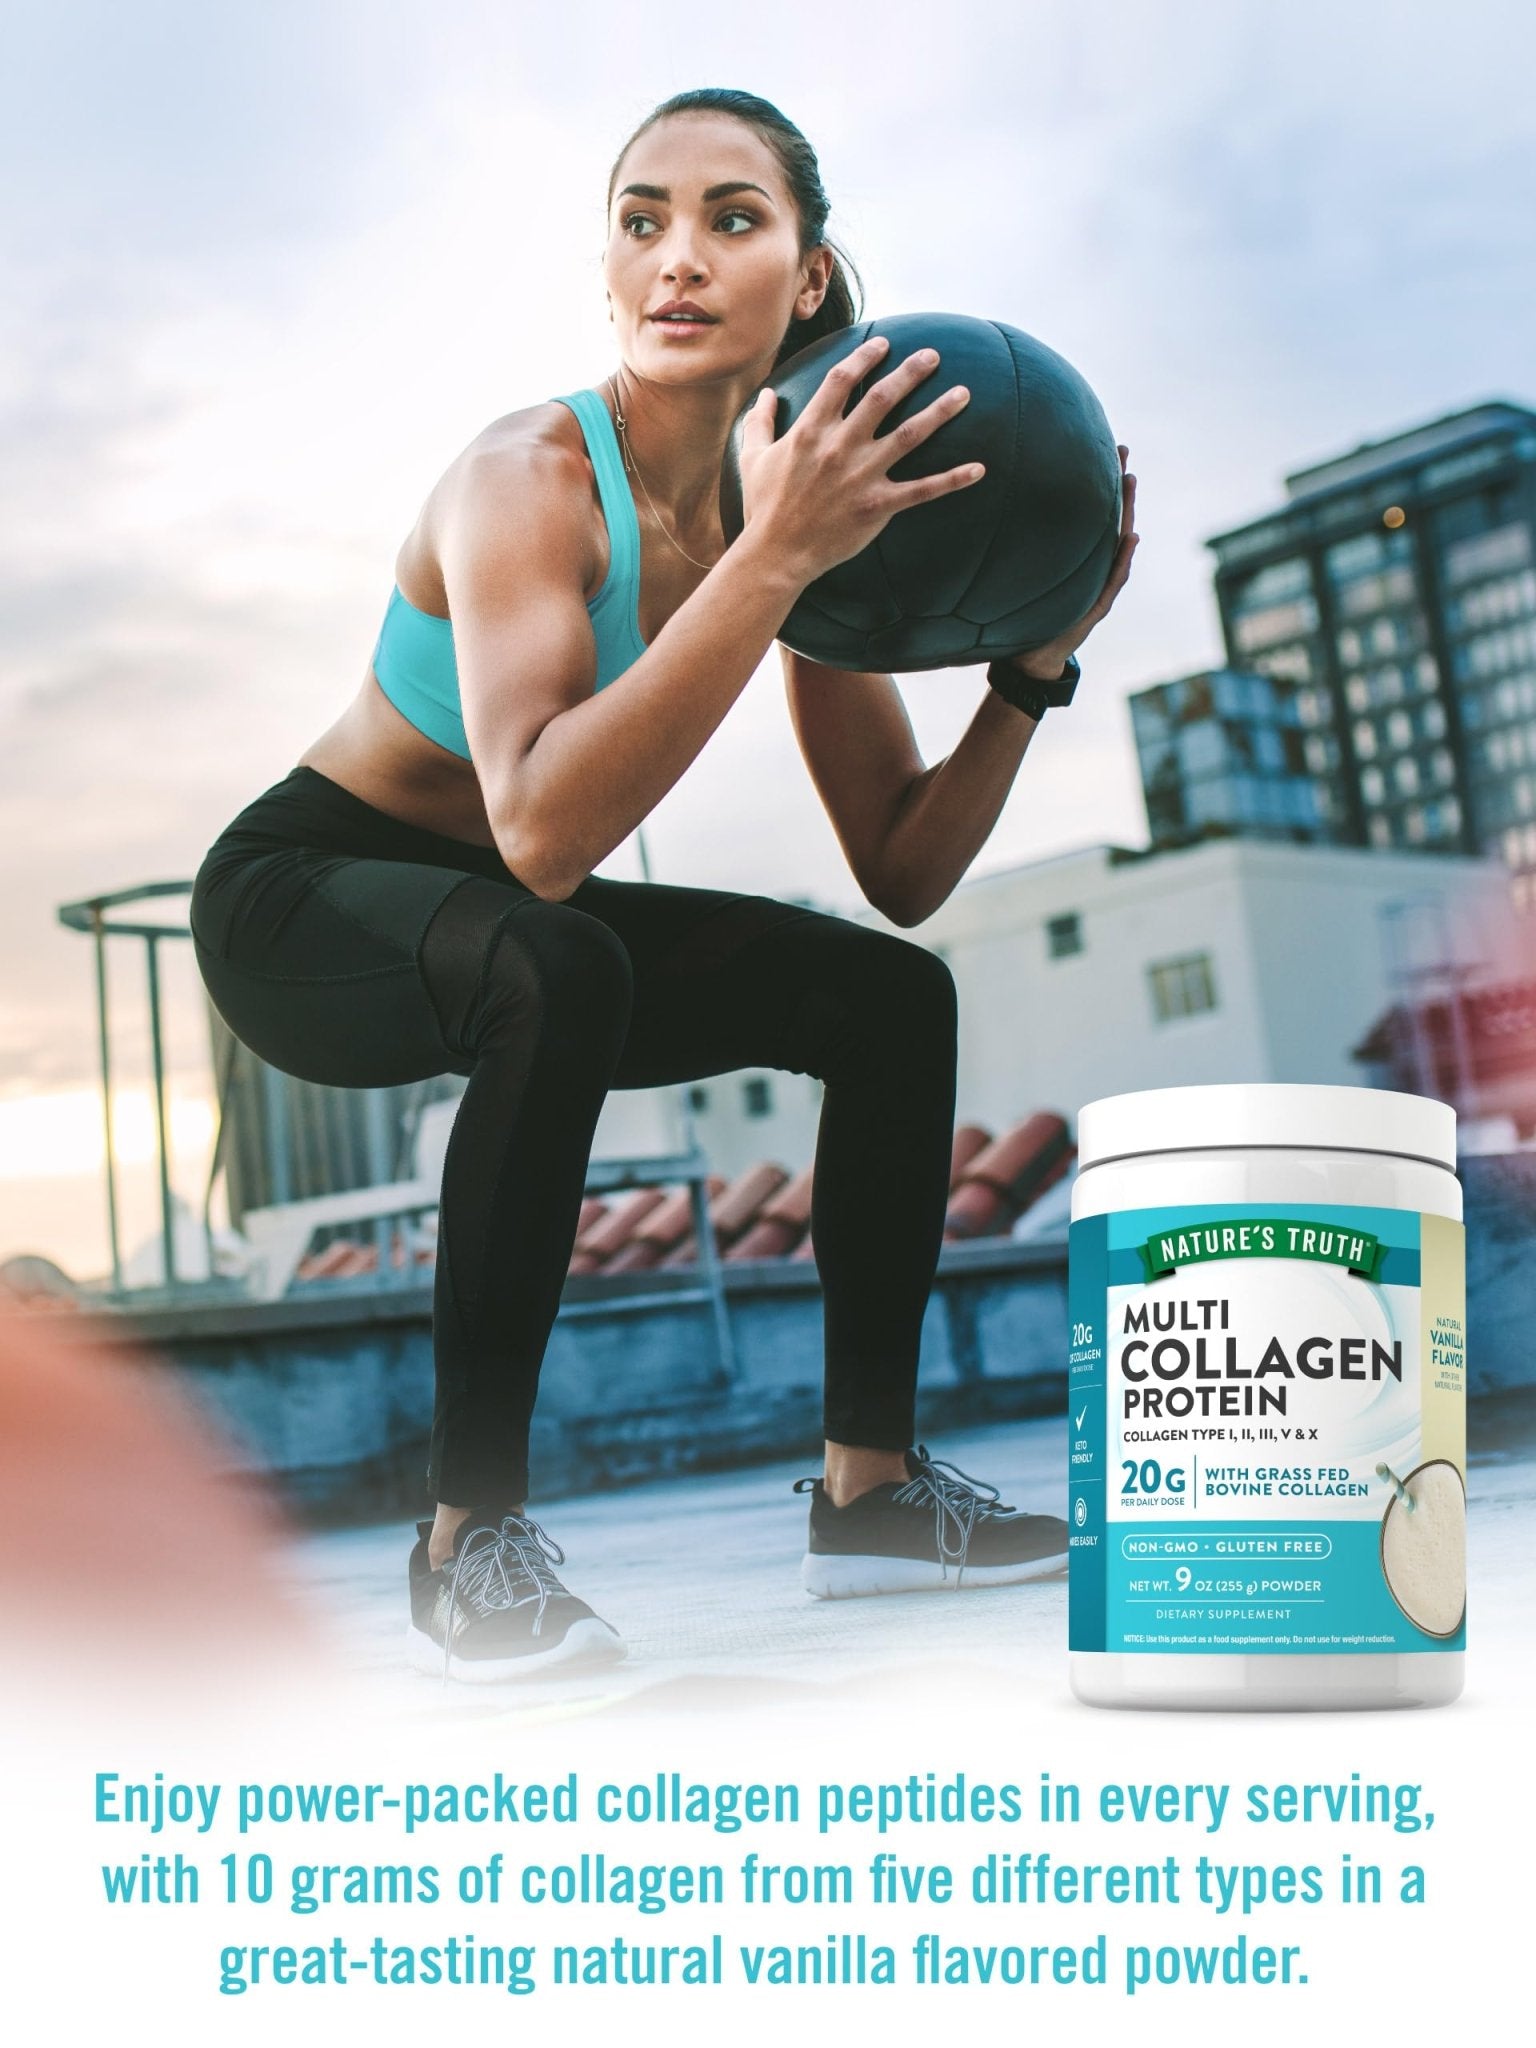 Nature's Truth Multi Collagen Protein Powder | Collagen Peptides Type I, II, III, V & X | Collagen Types 1, 2, 3, 5 & 10 | Hydrolyzed Collagen Peptide Protein Powder | Natural Vanilla Flavour | 9oz/255g Exp 10/2026 - Ome's Beauty Mart